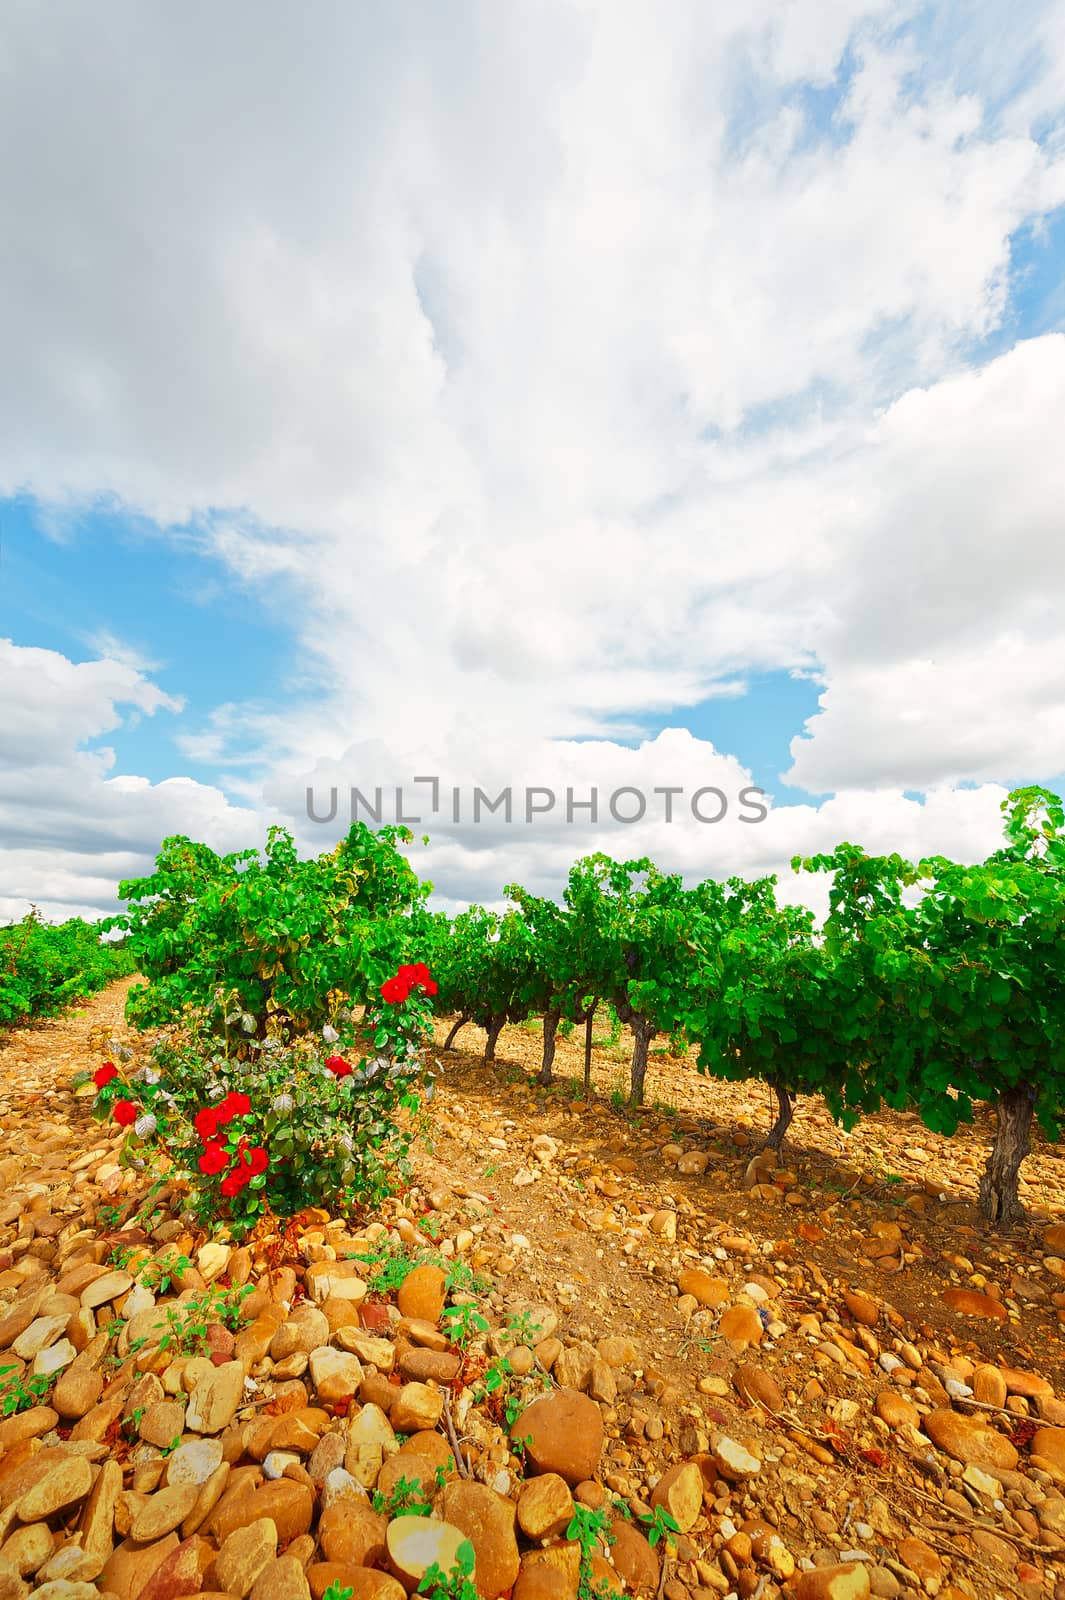 Hill in Spain with Ripe Vineyard and Rosebush